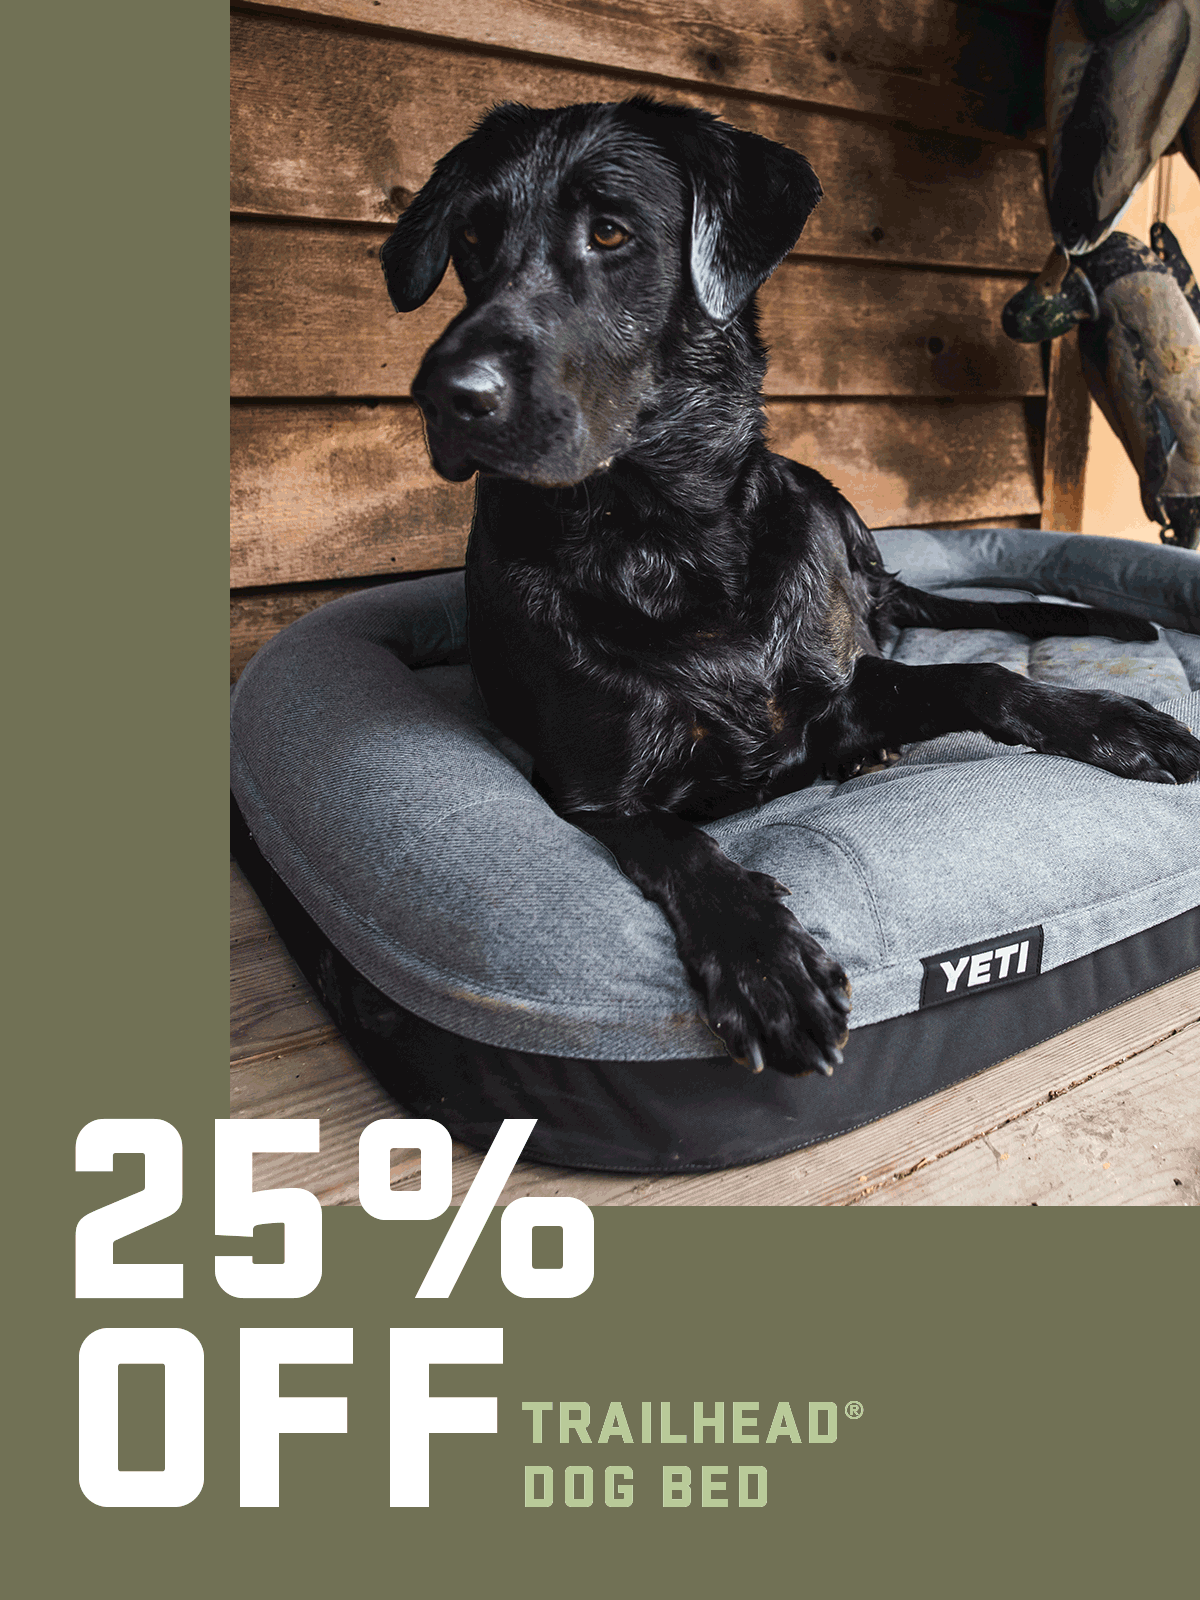 The Perfect Holiday Gift For Your Dog: The Yeti Trailhead Dog Bed